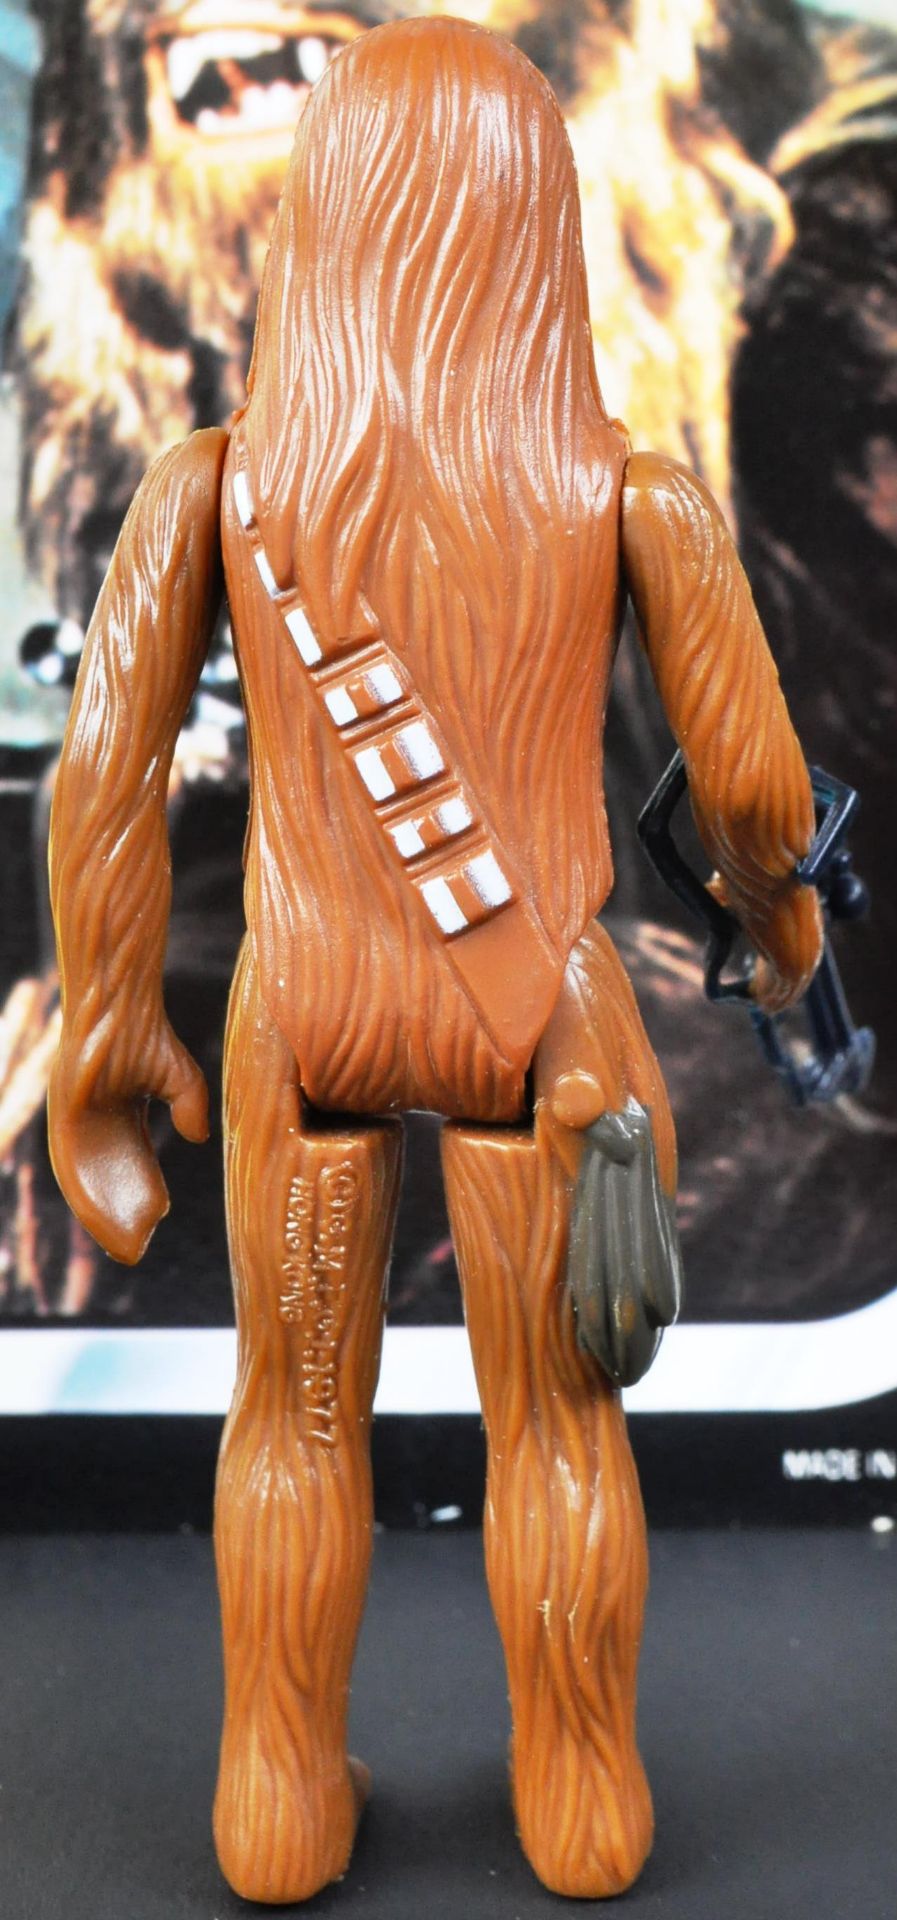 STAR WARS - RETURN OF THE JEDI - PALITOY ACTION FIGURES - Image 5 of 7